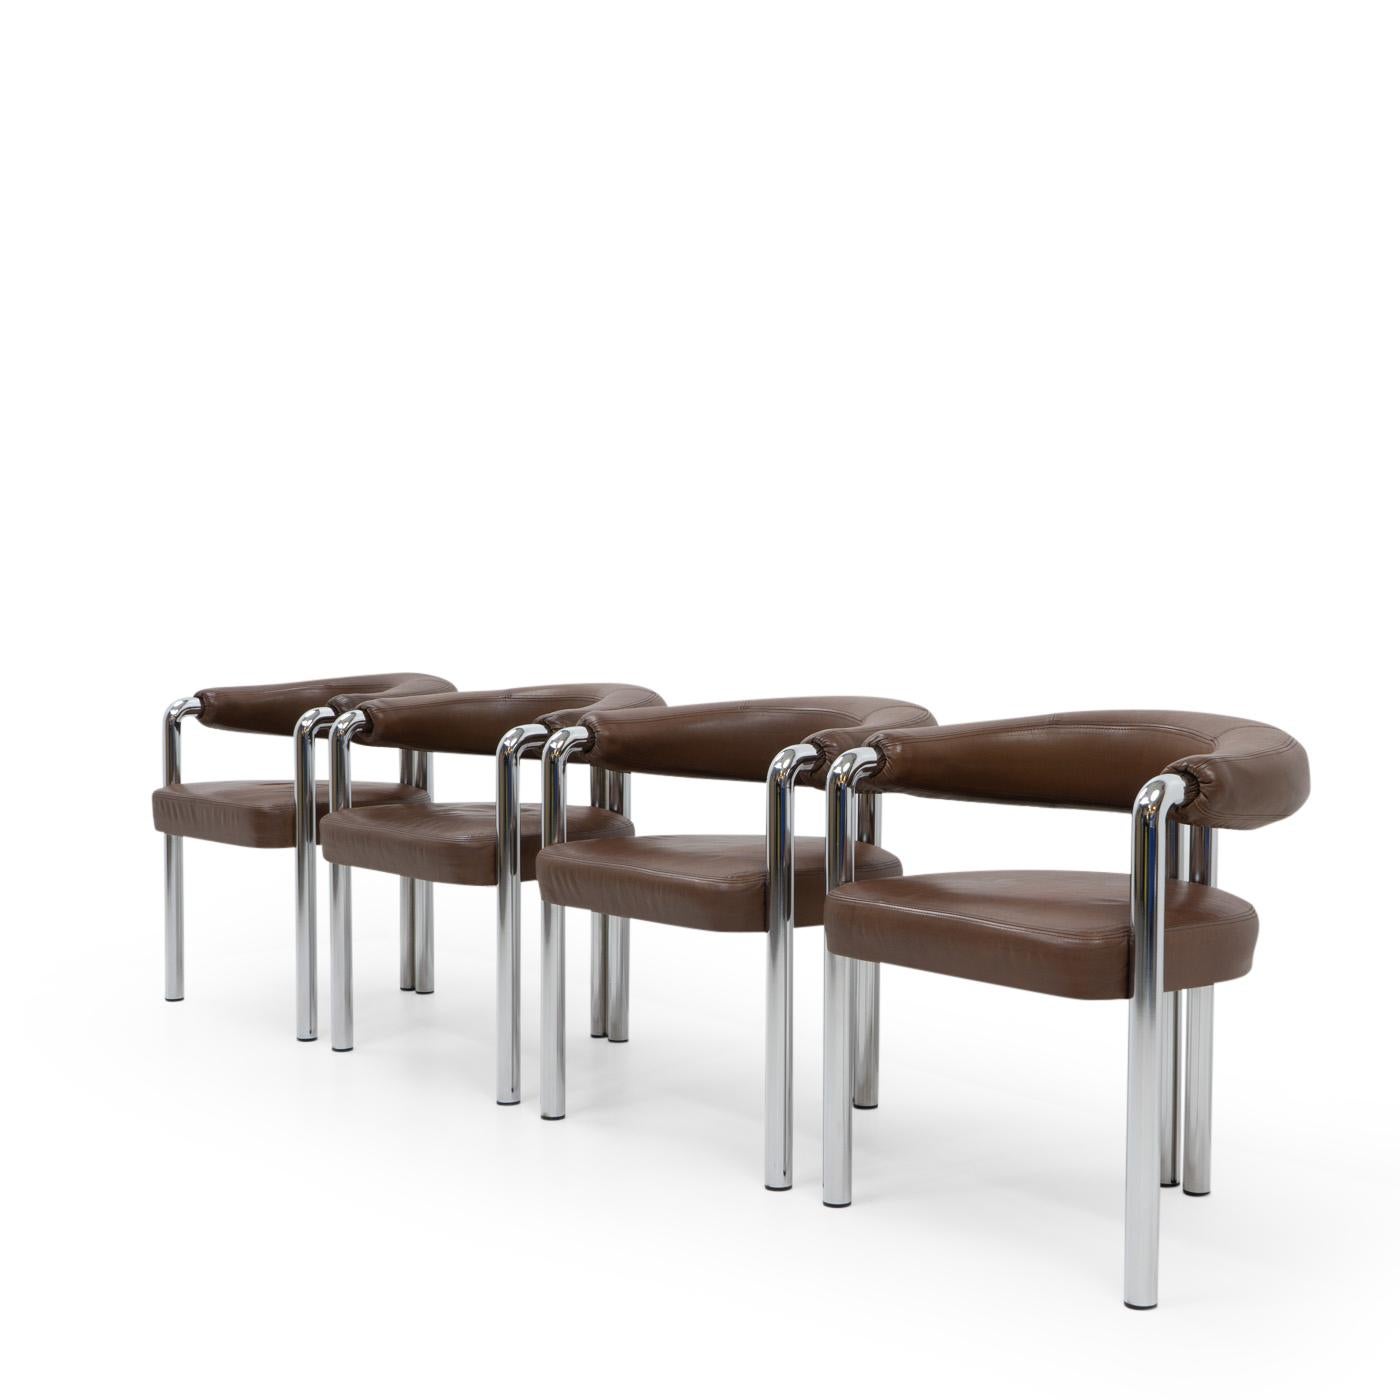 Four armchairs in leather and chromed steel by the Swiss furniture maker De Sede, guaranteeing a high quality product, completely handmade by skilled artisans from the finest Swiss cow hides available.

These sculptural chairs, which might recall